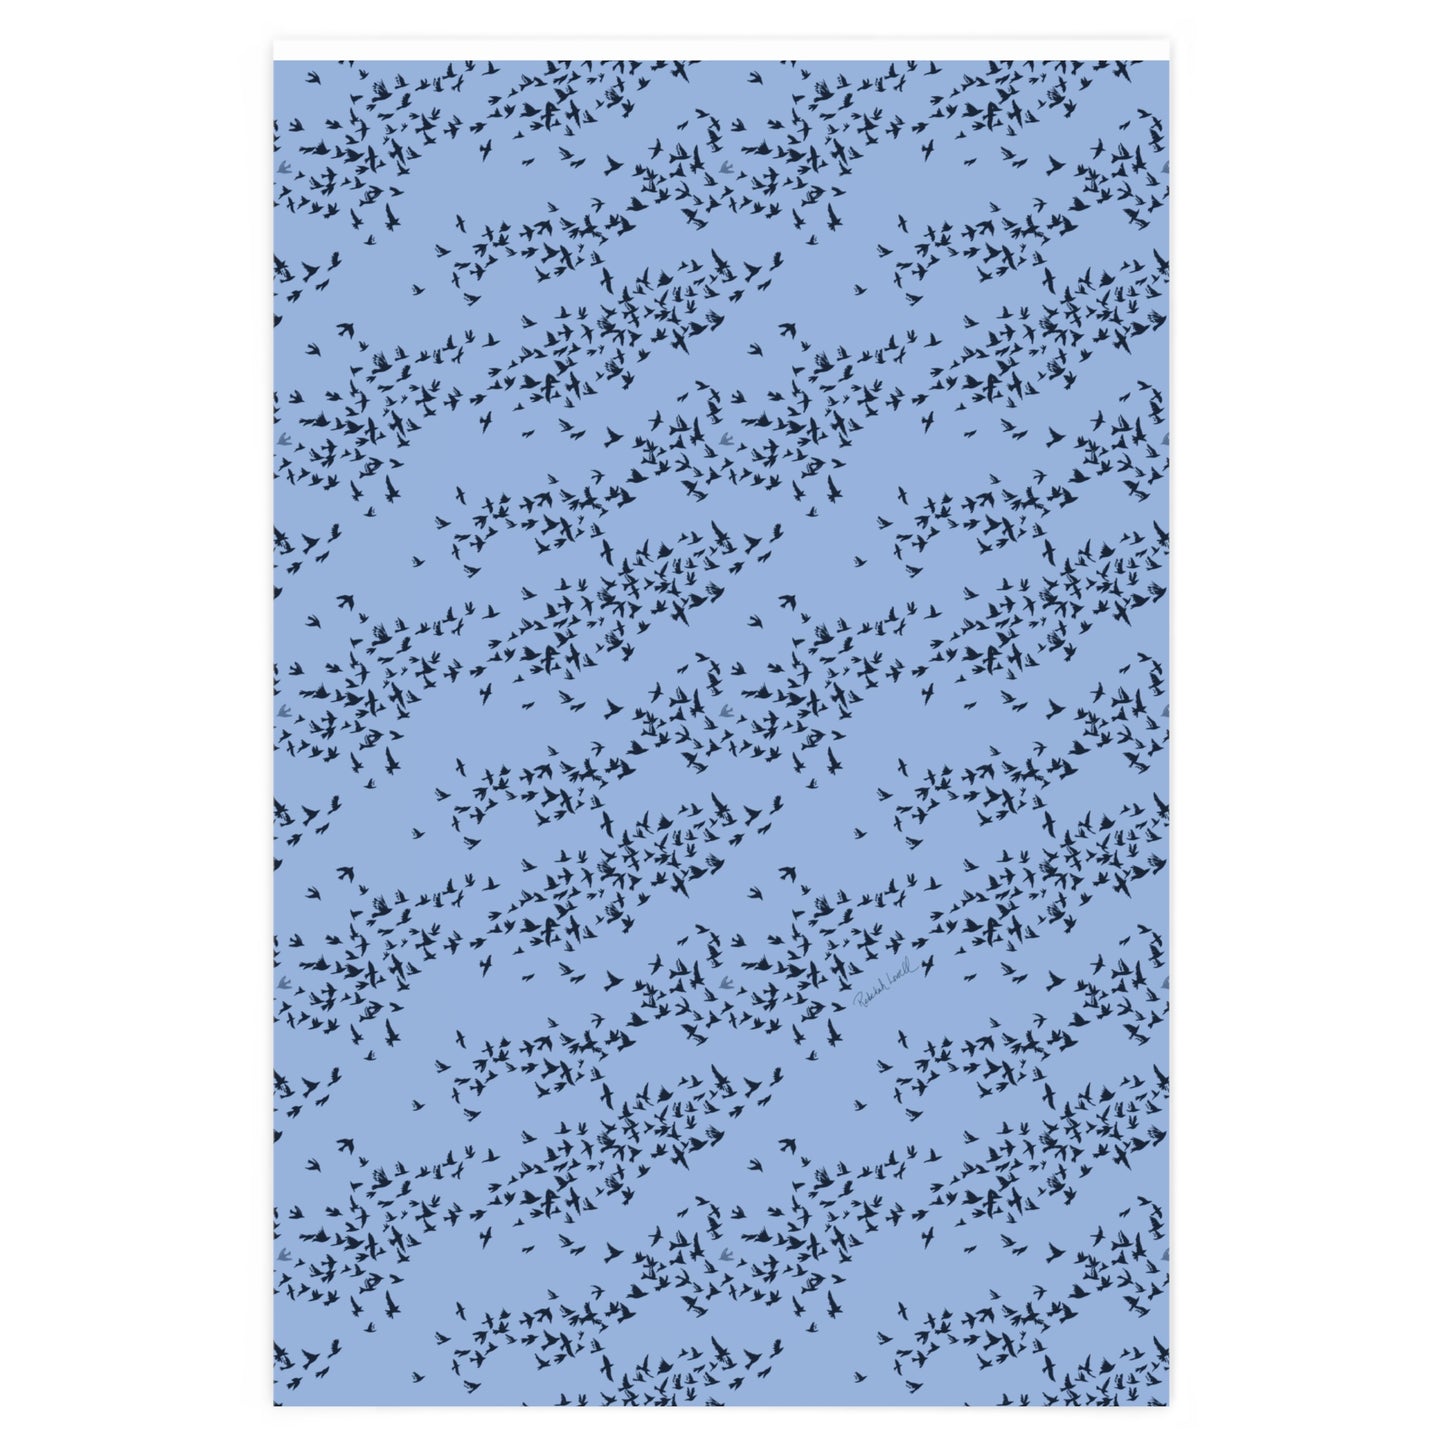 Bird Migration Wrapping Paper